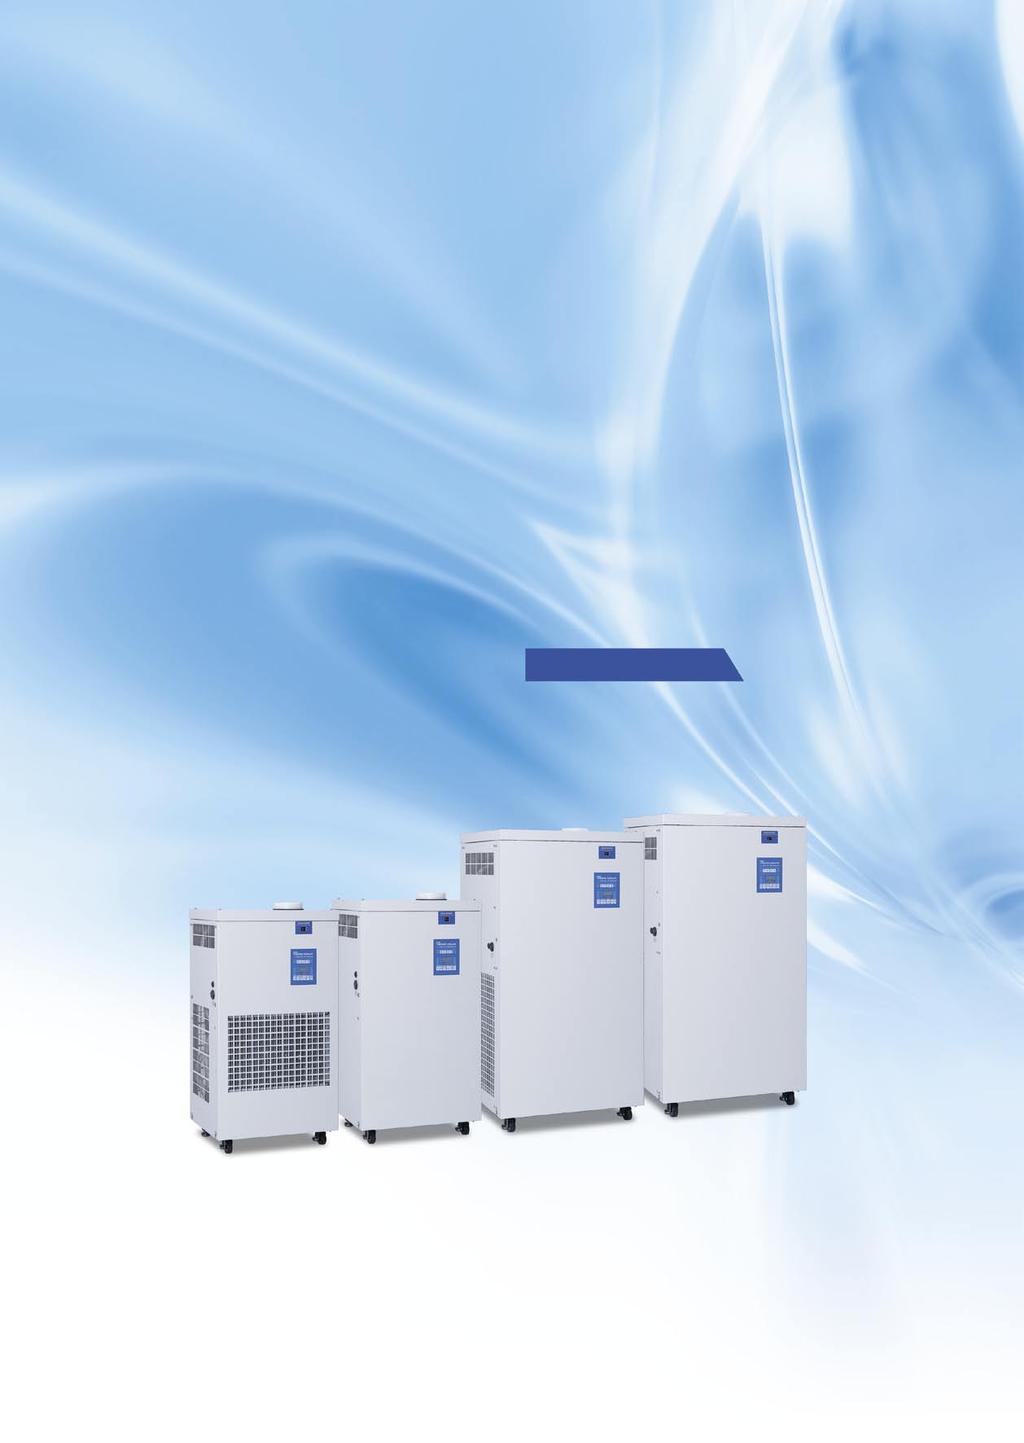 Circulating Fluid Temperature Controller Refrigerated Thermo-cooler Makes cooling water easily available, anytime, anywhere.